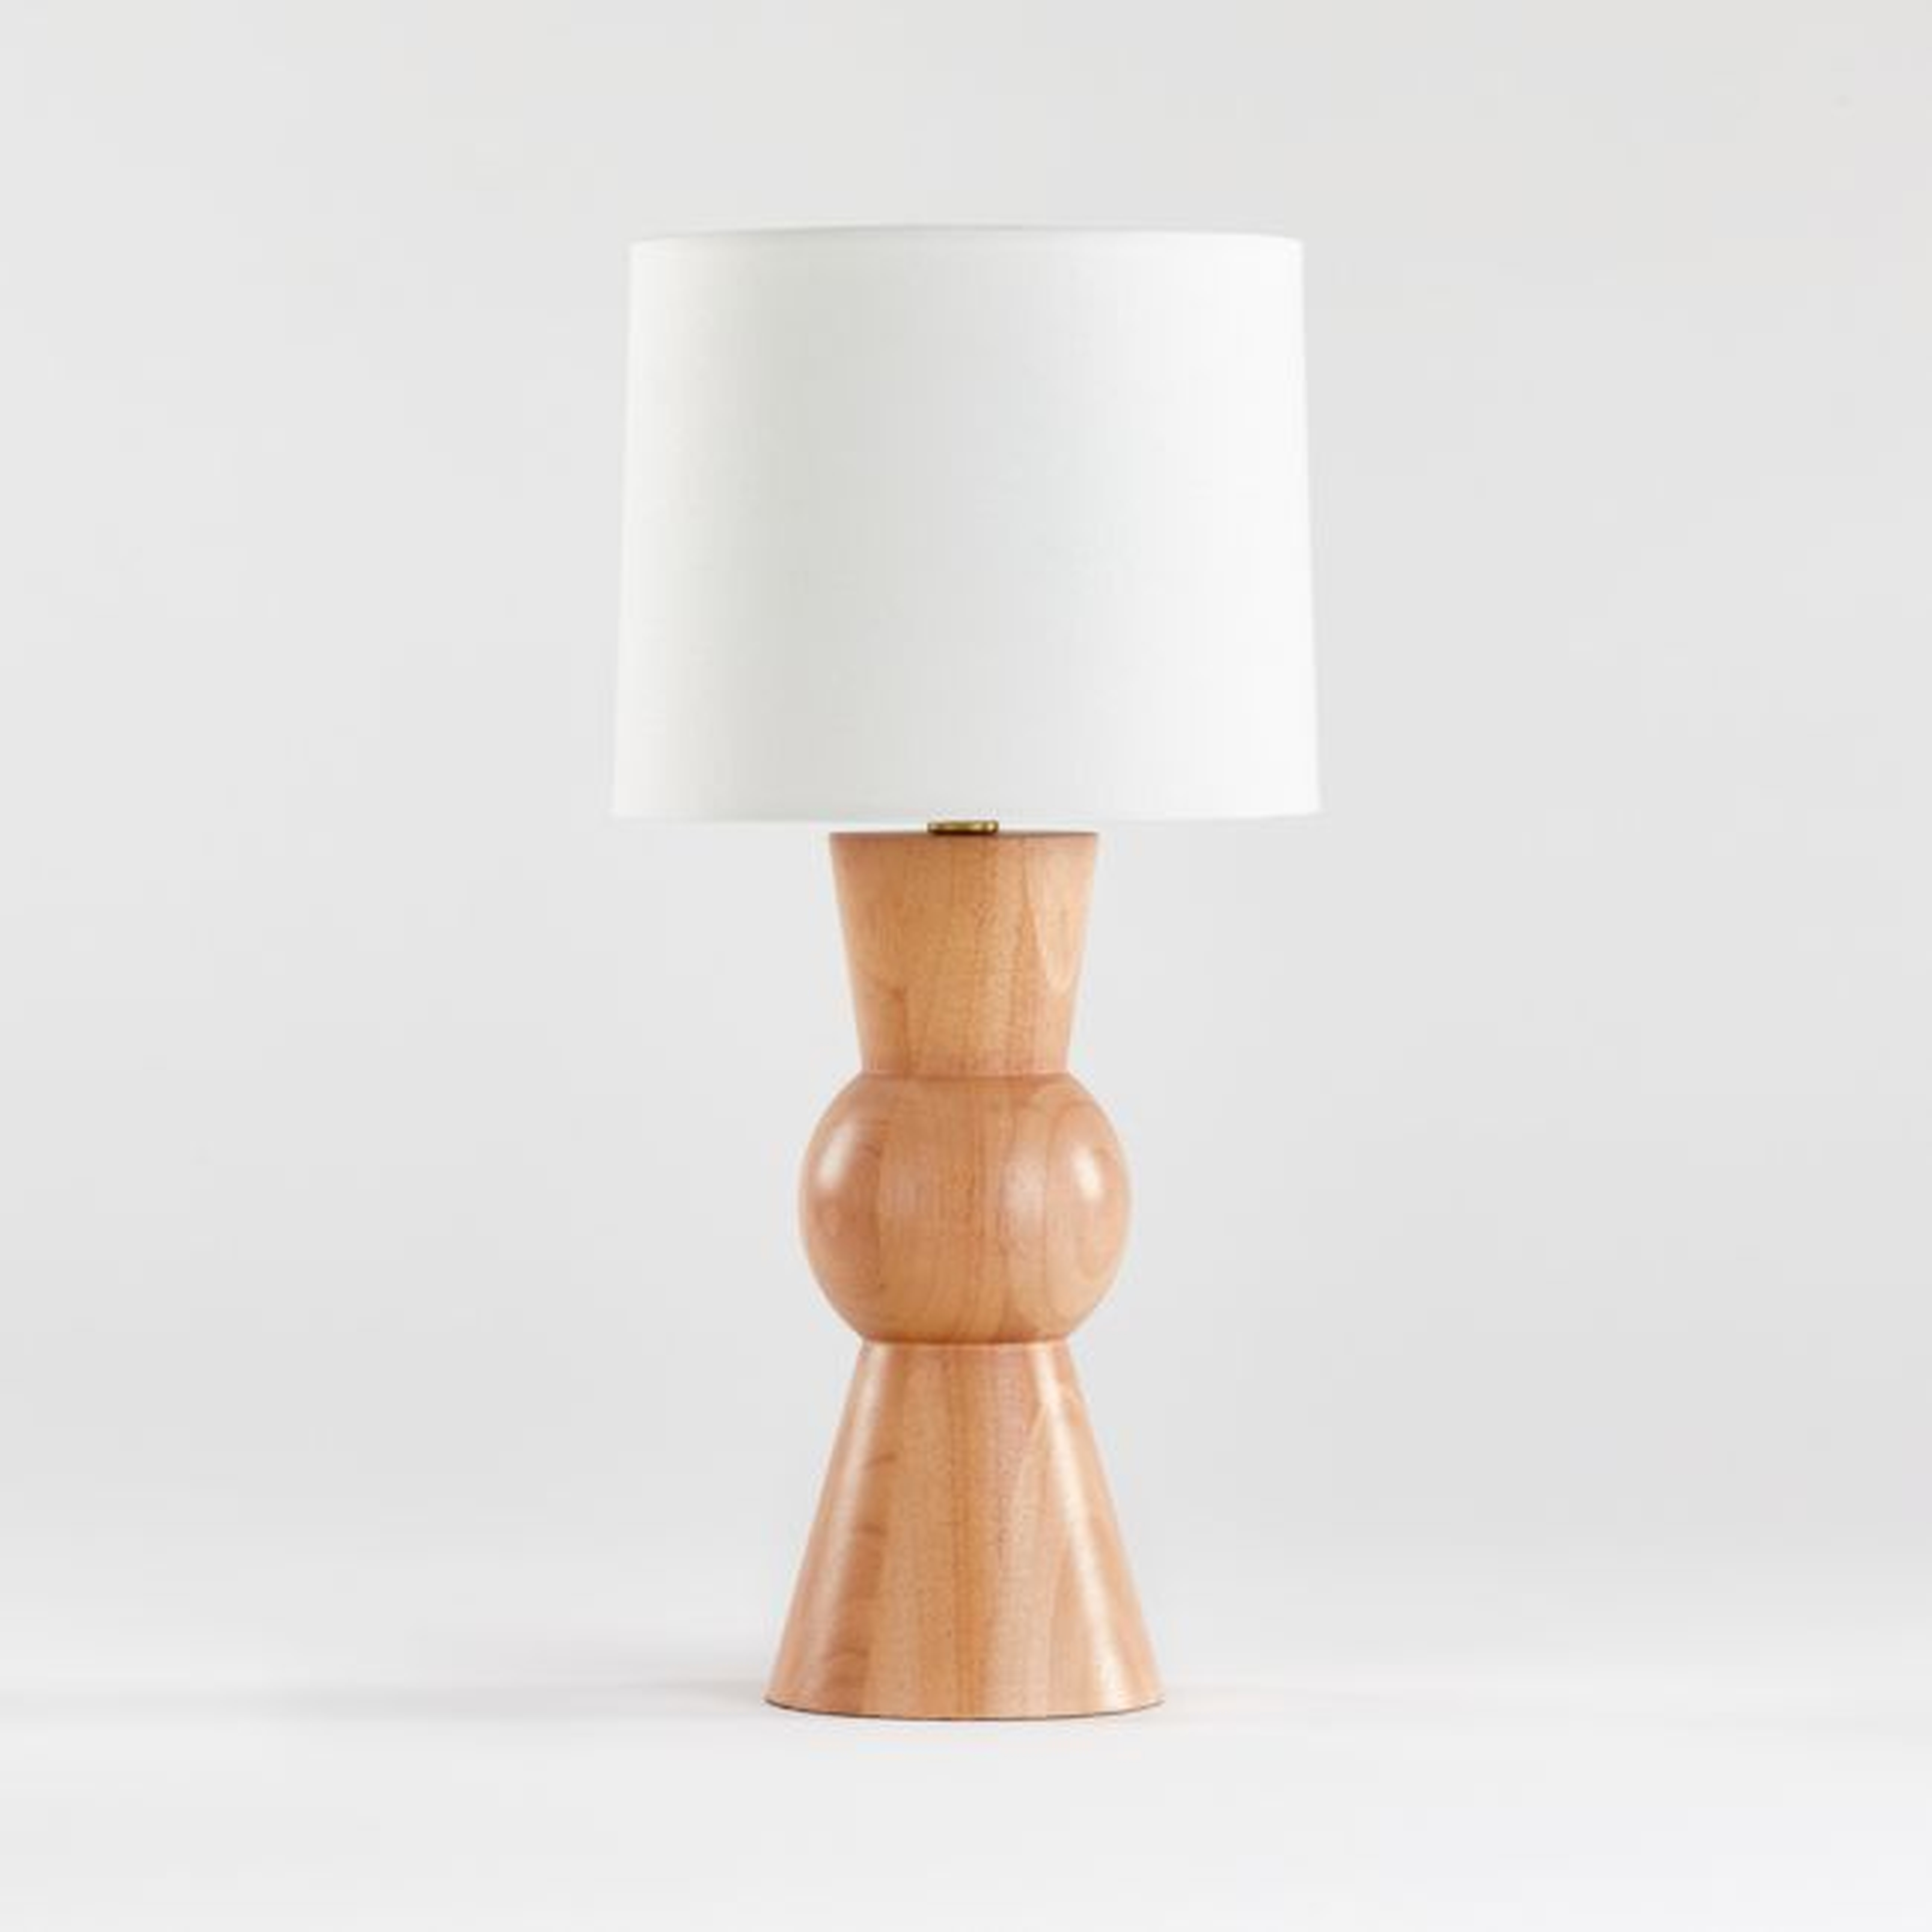 Valby Table Lamp - Crate and Barrel